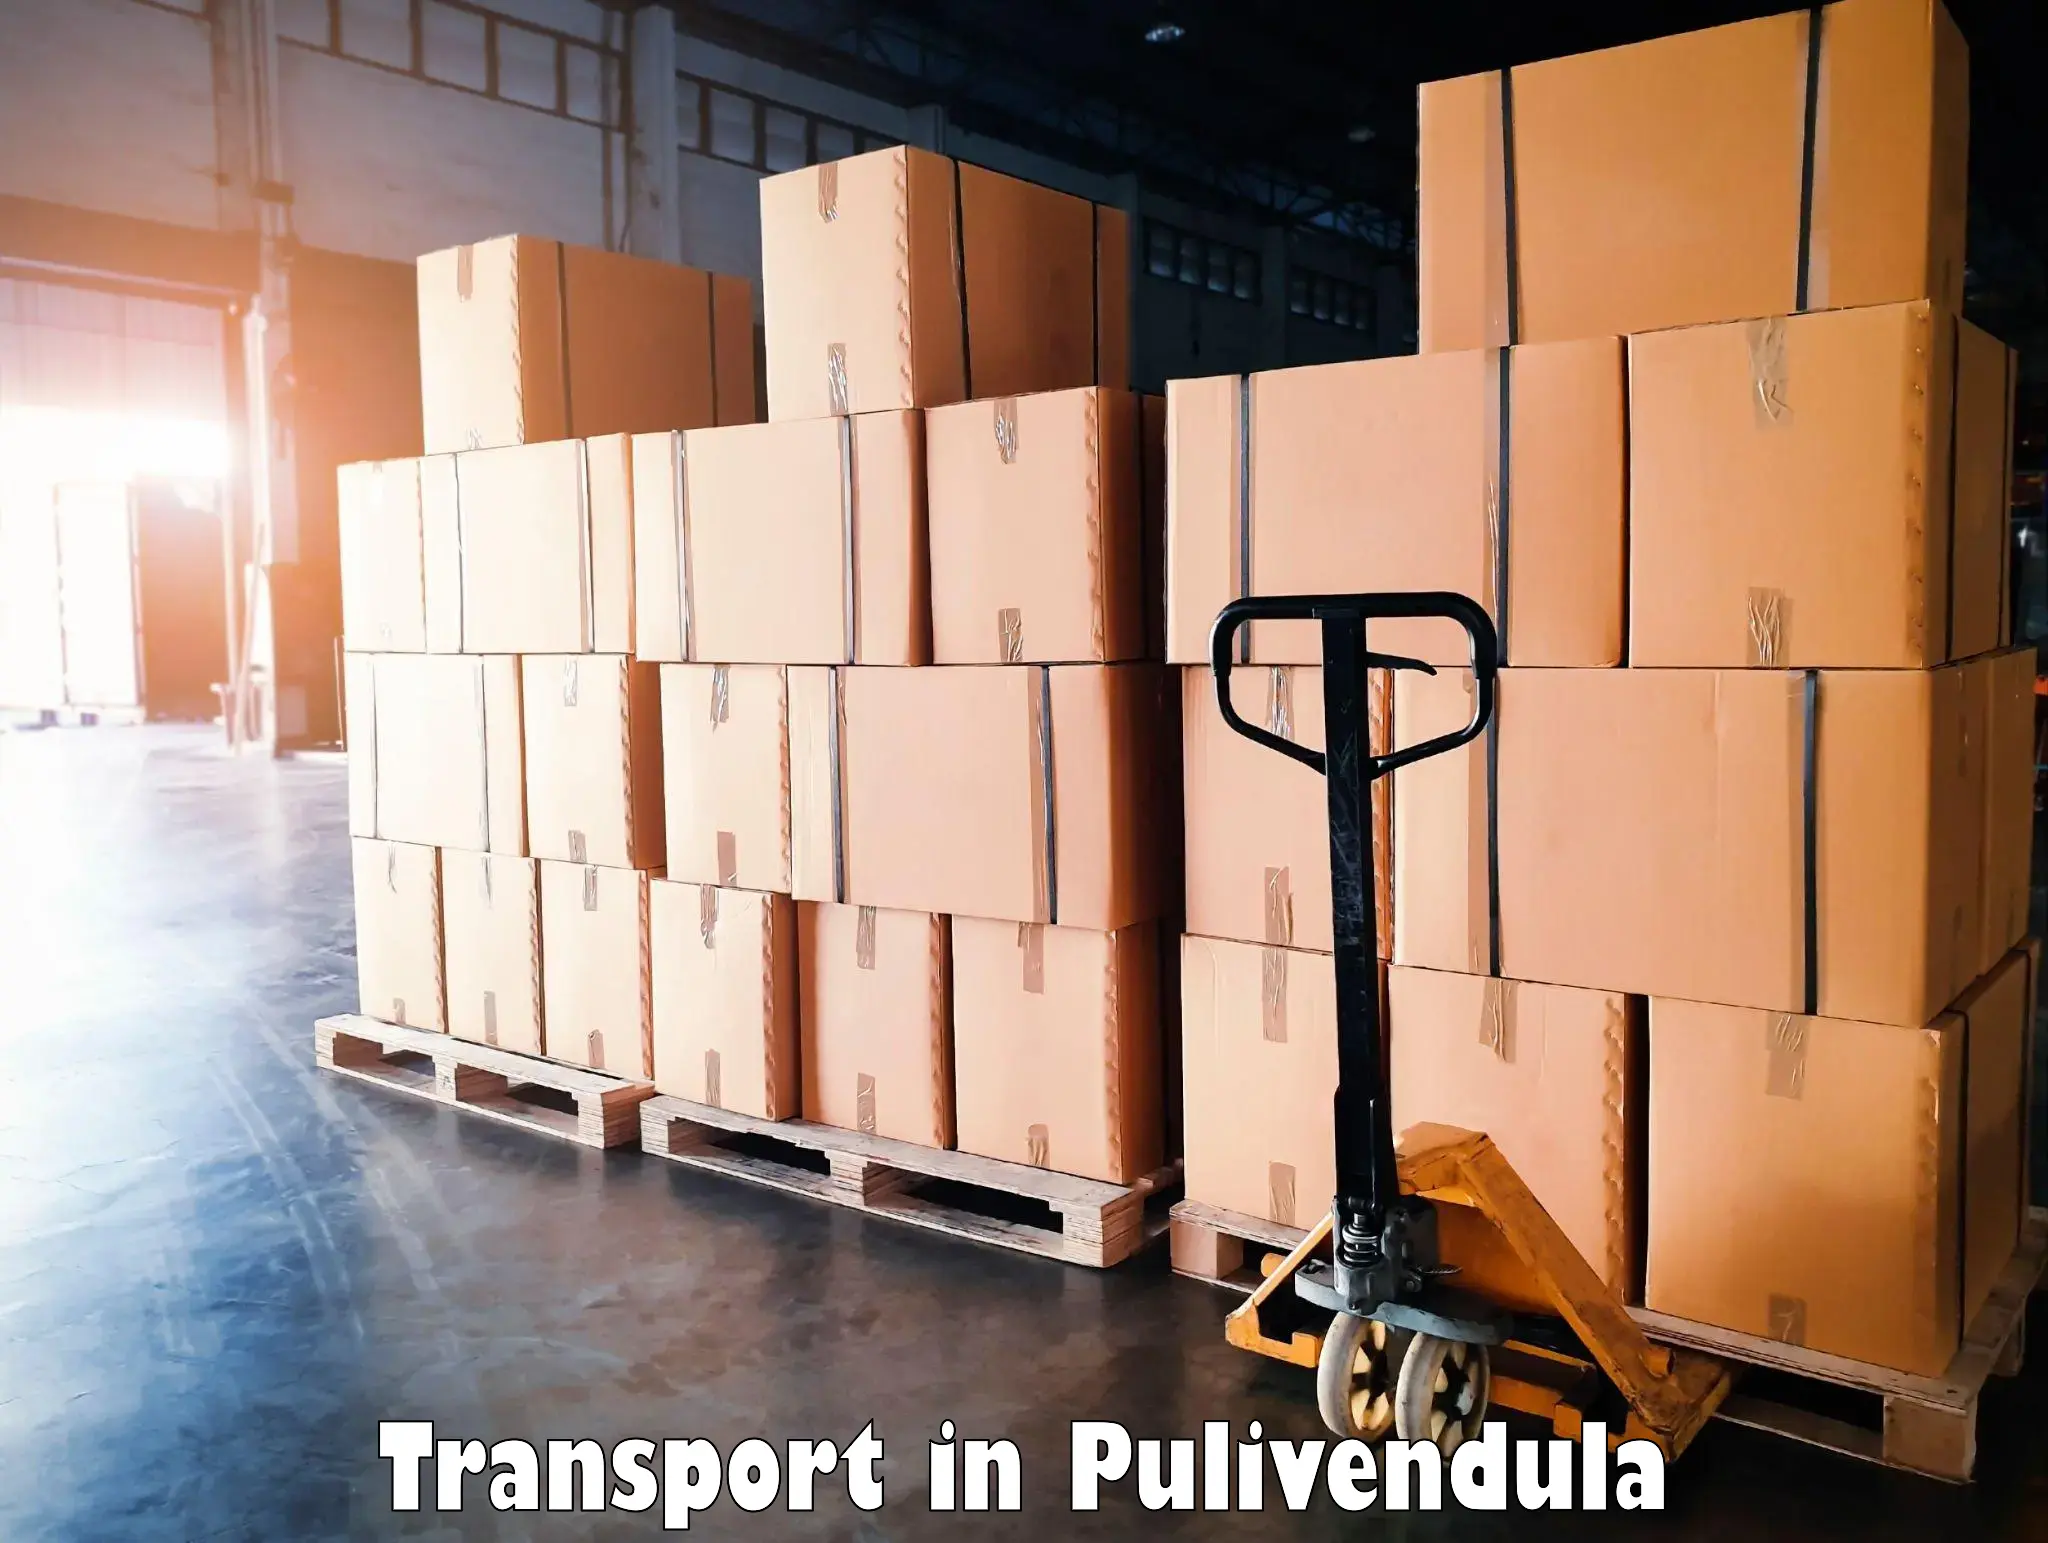 Transport bike from one state to another in Pulivendula